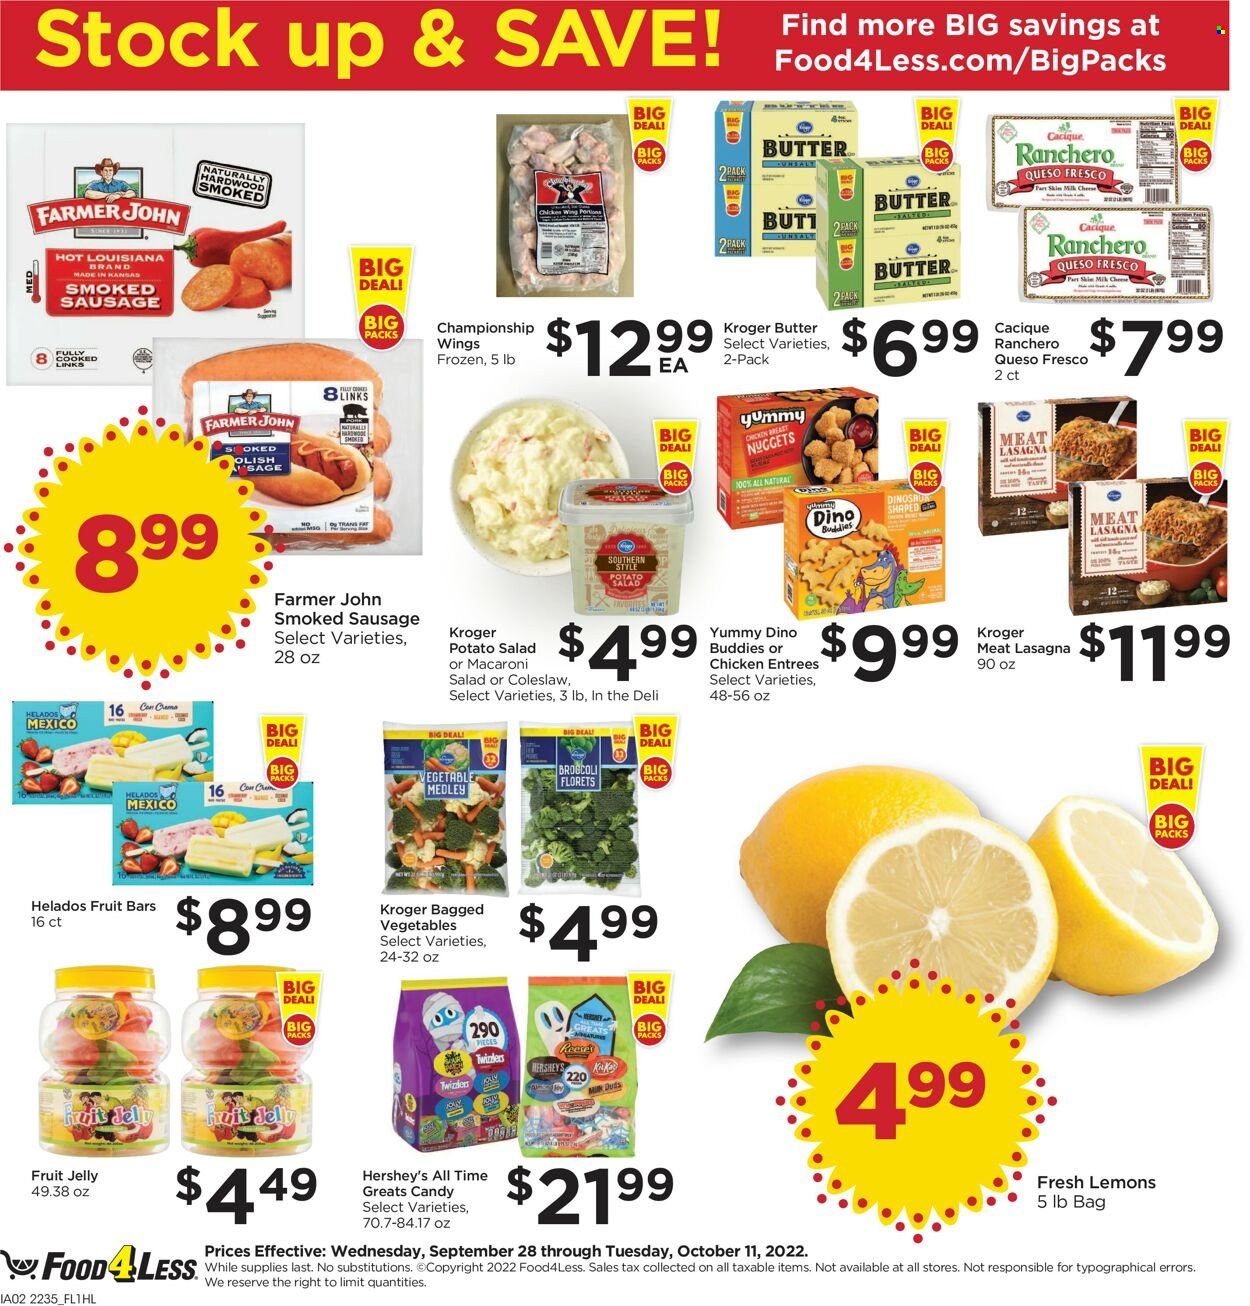 thumbnail - Food 4 Less Flyer - 09/28/2022 - 10/04/2022 - Sales products - broccoli, coleslaw, nuggets, chicken nuggets, lasagna meal, Yummy Dino Buddies, sausage, smoked sausage, potato salad, macaroni salad, queso fresco, butter, Hershey's, jelly, lemons. Page 2.